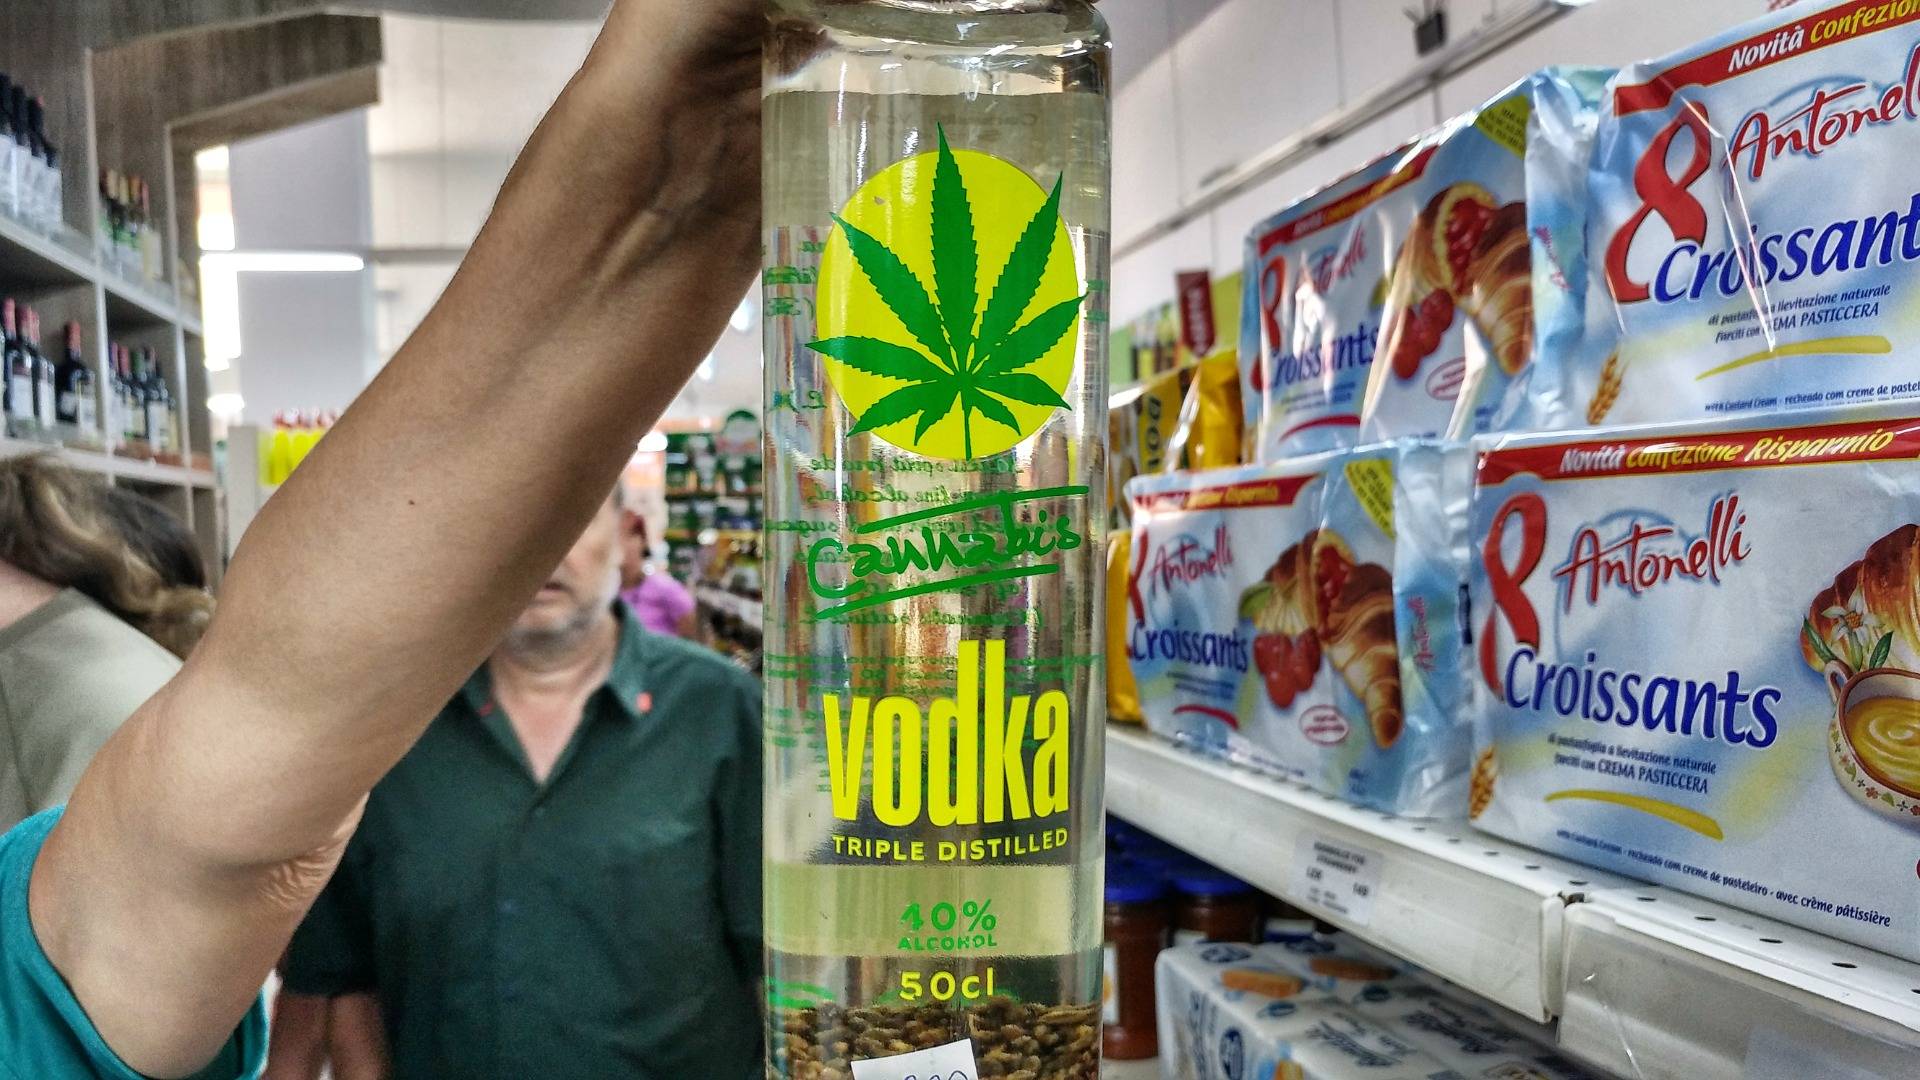 Another Vodka, made of Albanian weed (read here all about it)